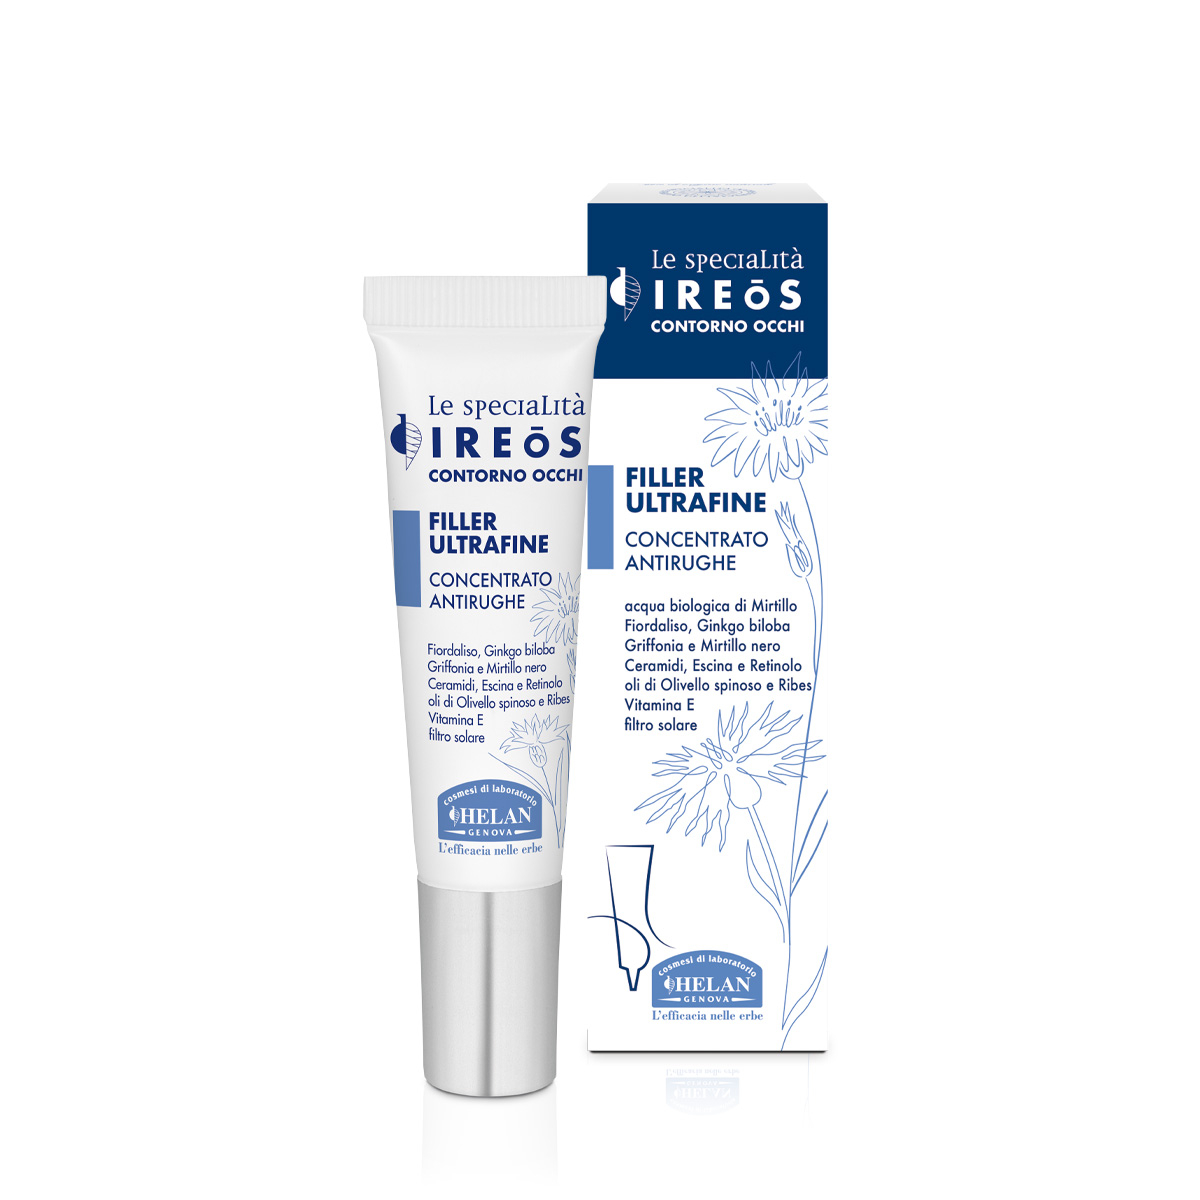 Ultrafine Concentrated Anti-Wrinkle Filler